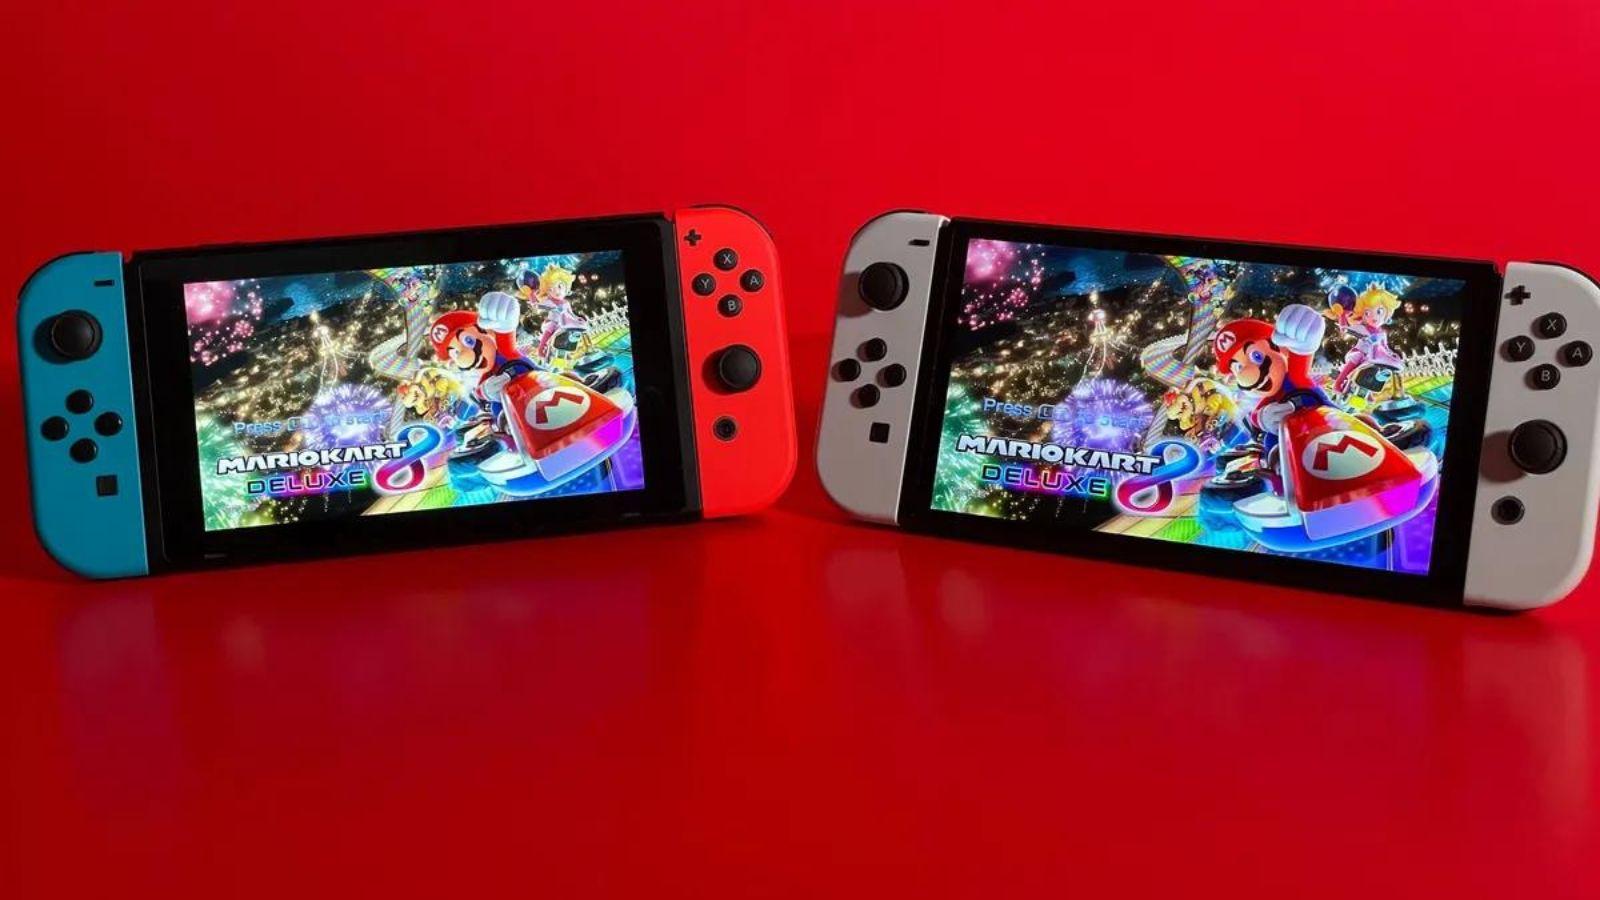 Sunrise - Get your hands on an EXCLUSIVE Nintendo Switch console